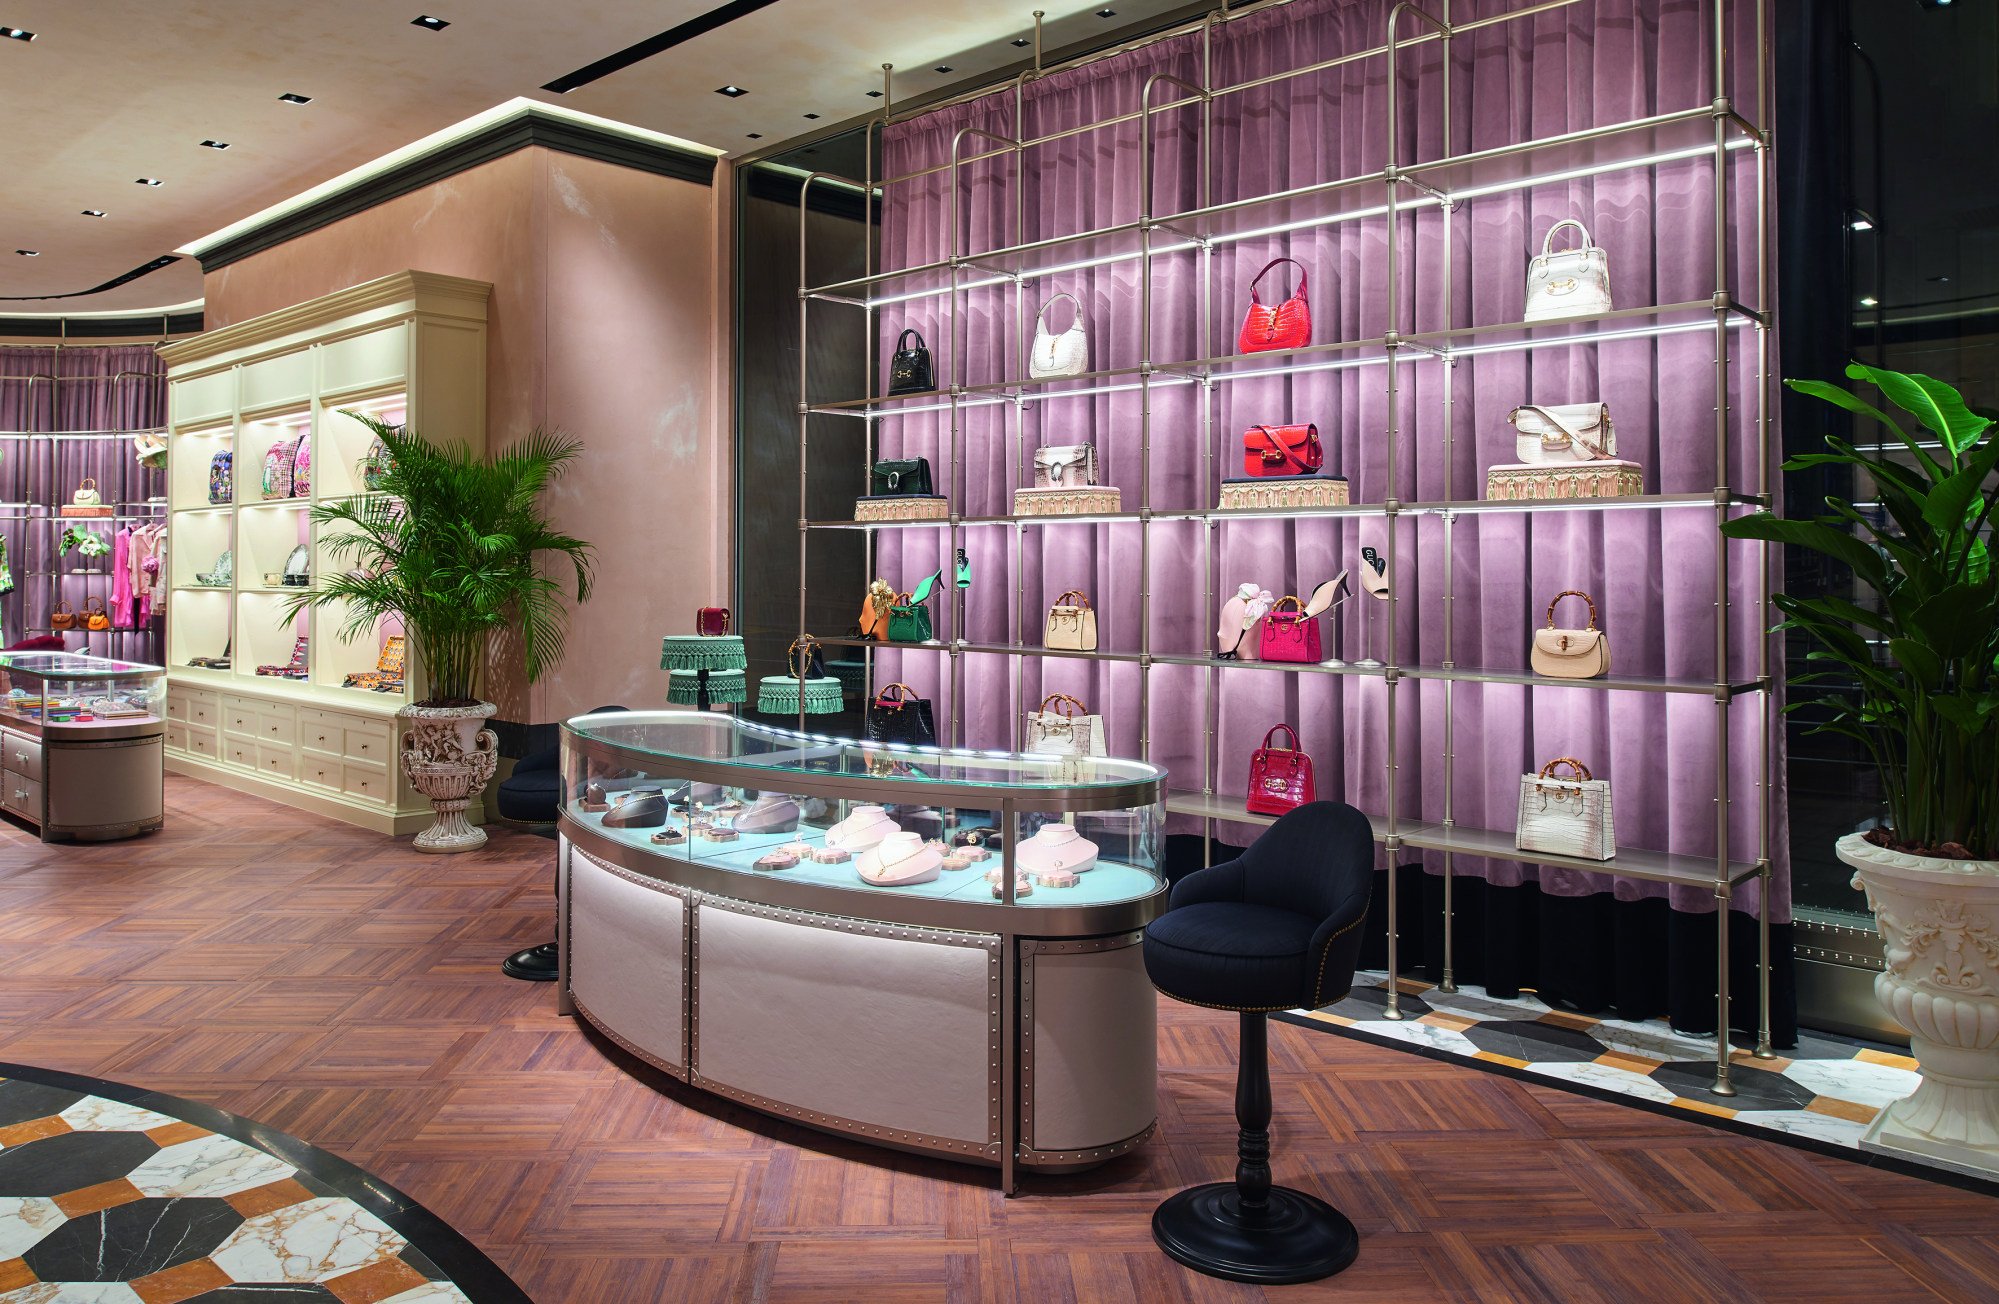 A new look for Gucci stores